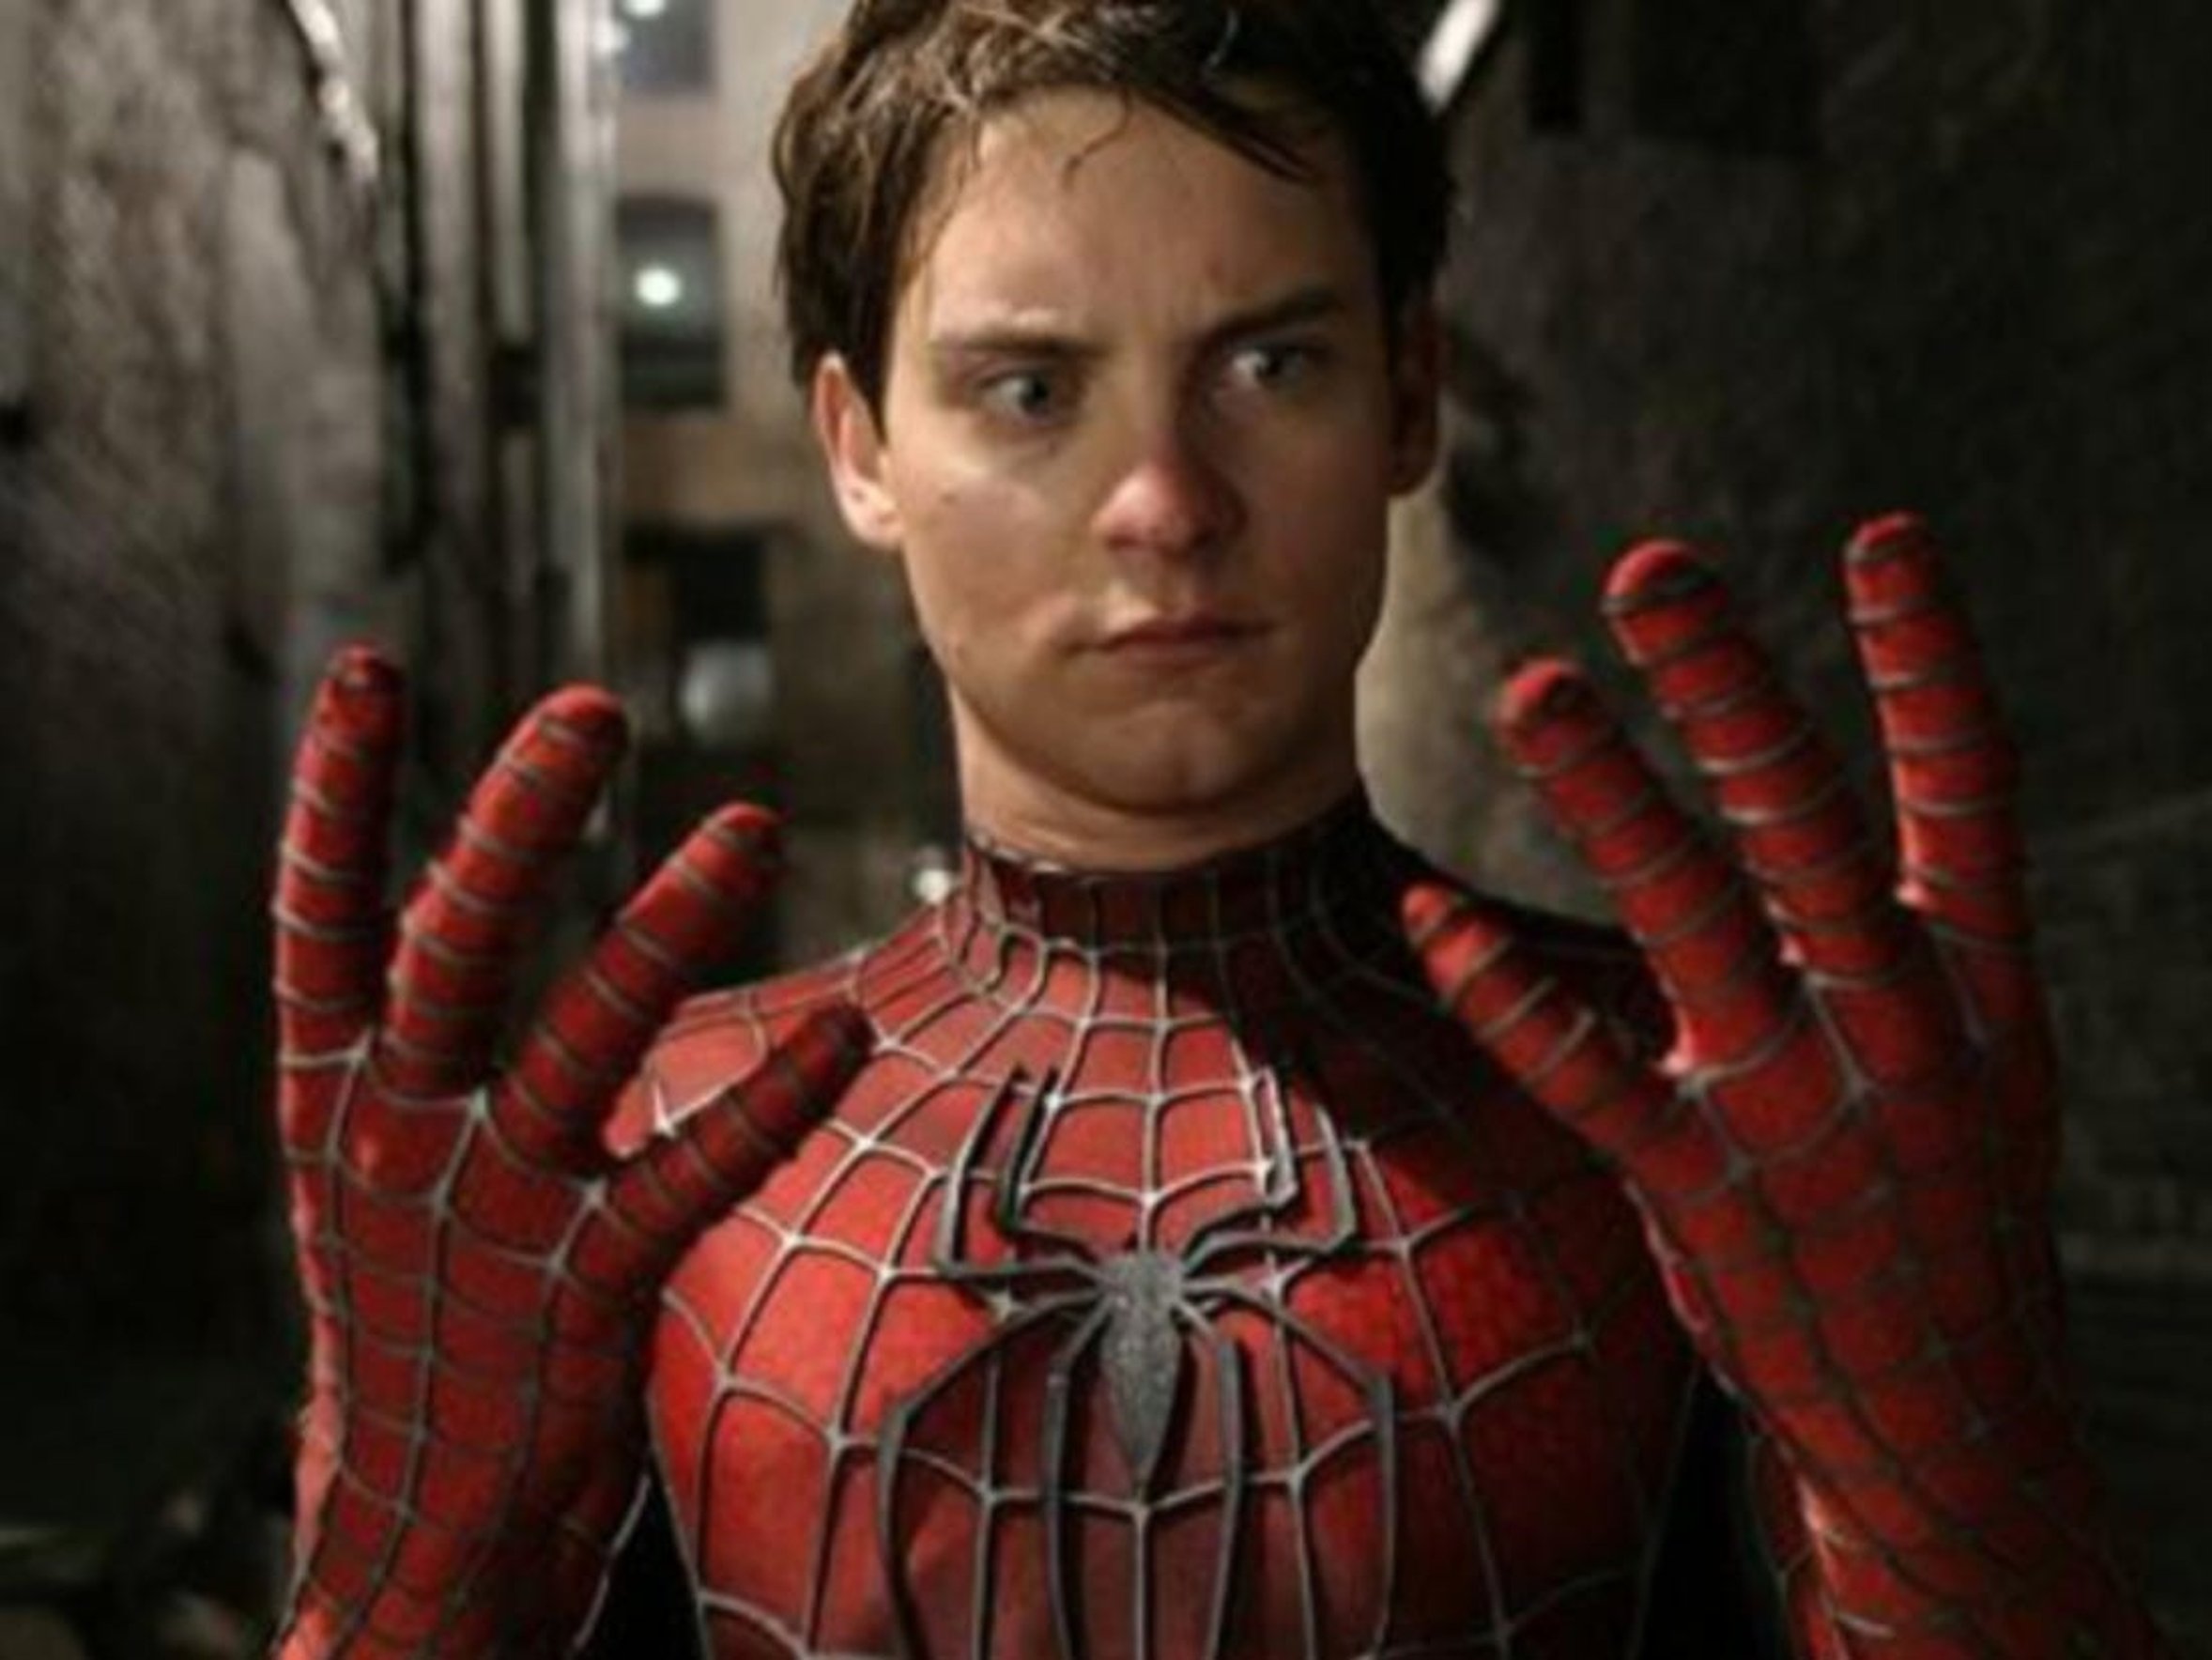 Spiderman: James Cameron was involved in making a very significant change to the neighborhood hero